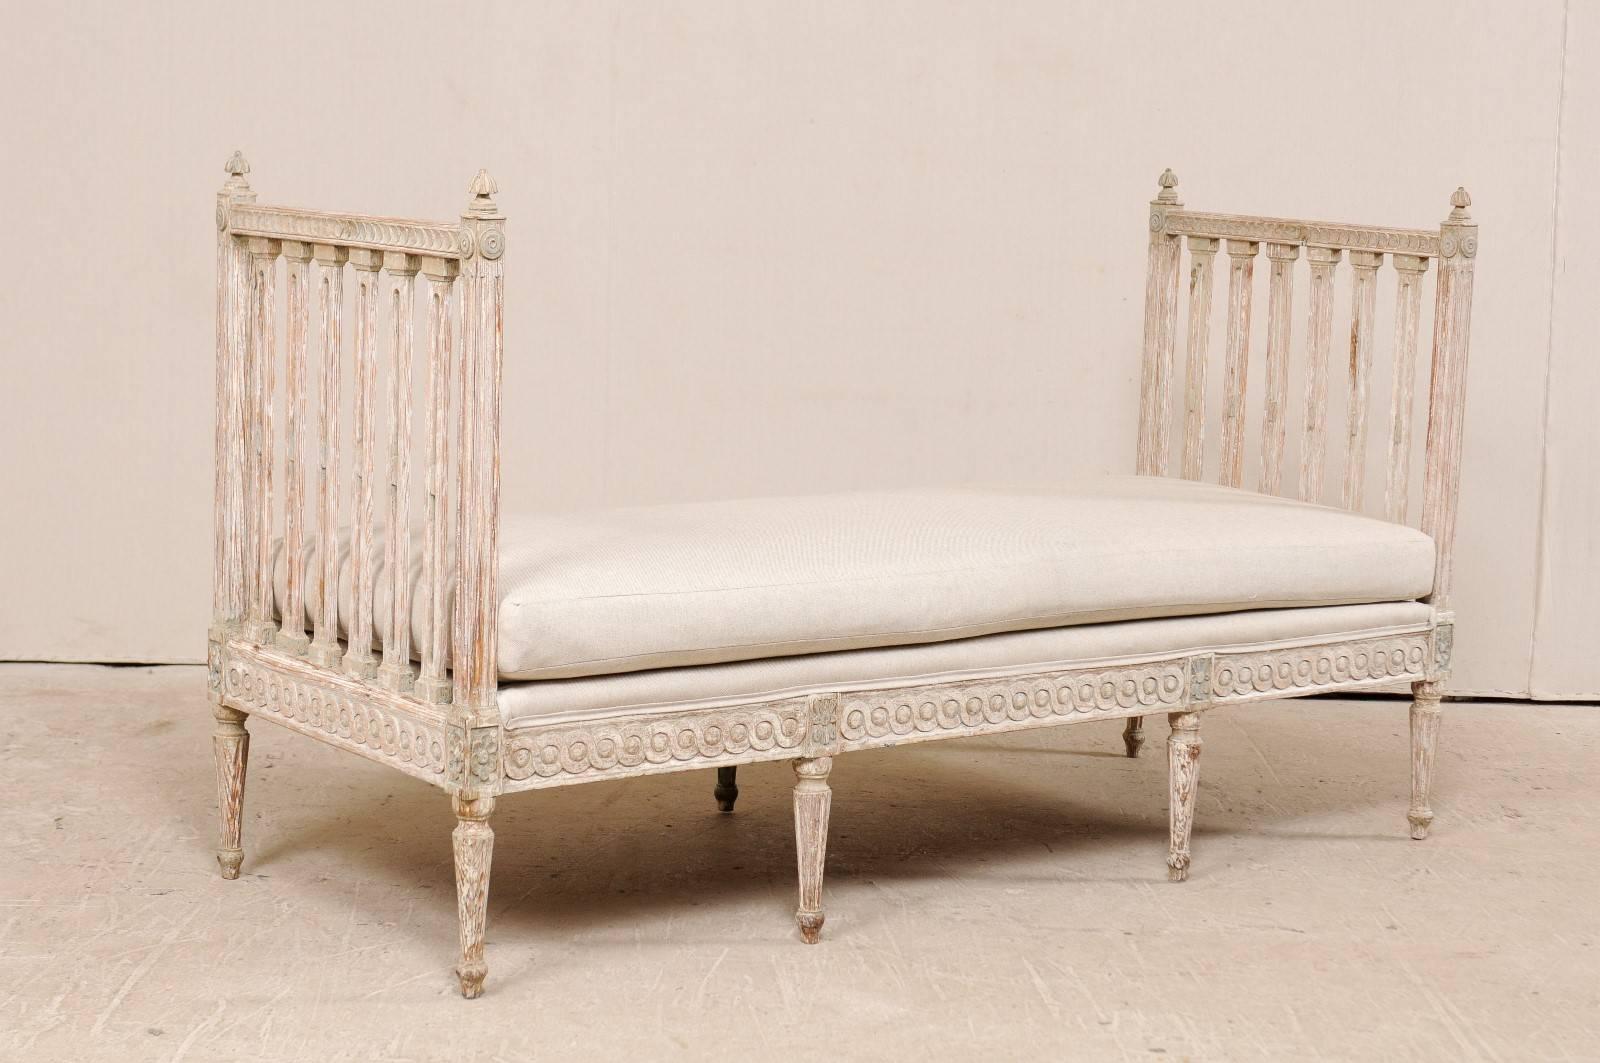 Swedish Period Gustavian Daybed Sofa Bench from the Late 18th Century in Cream 2